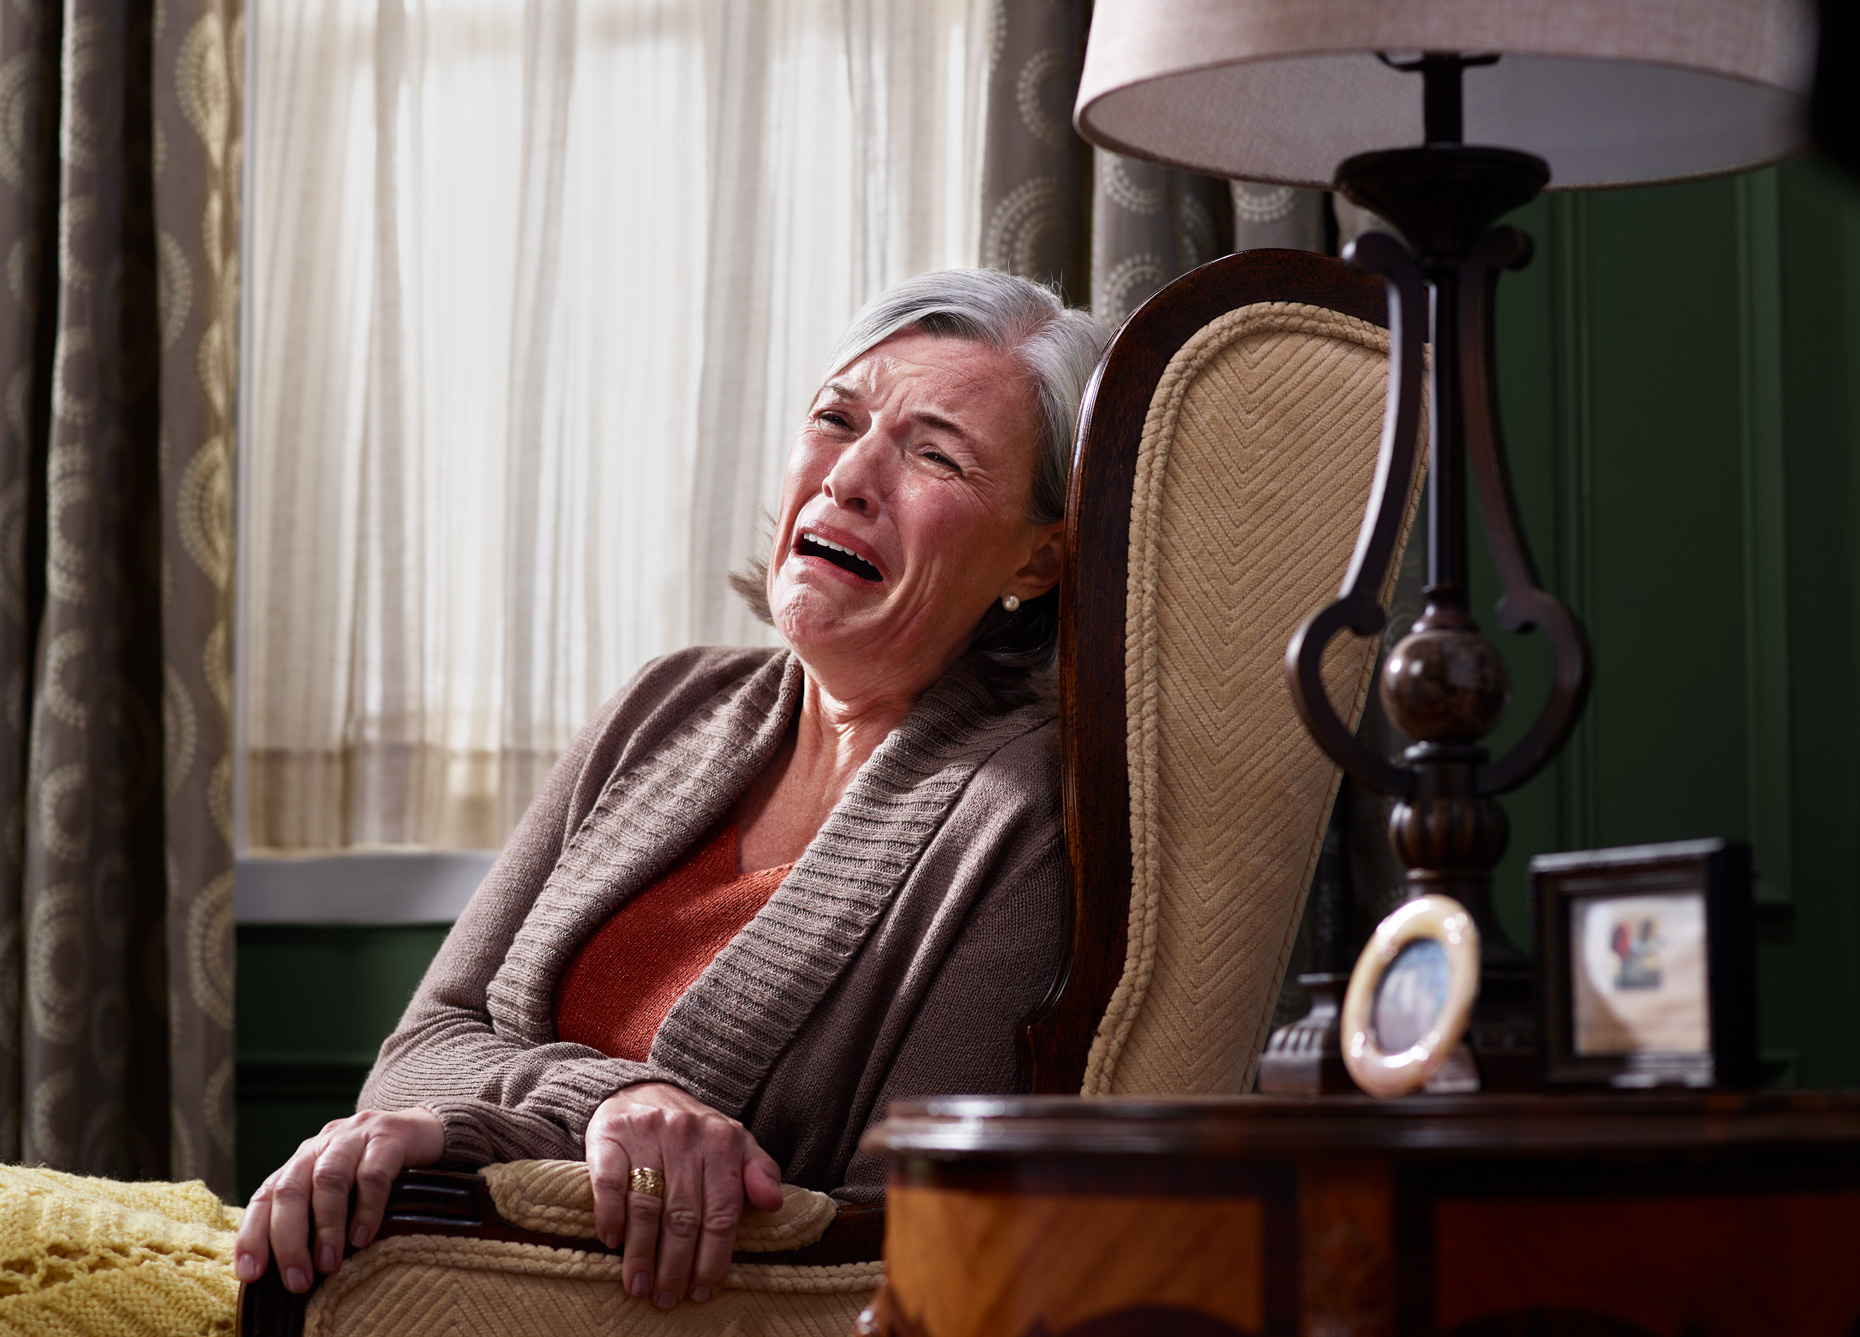 Older woman crying in livingroom | Conceptual portrait by Saverio Truglia